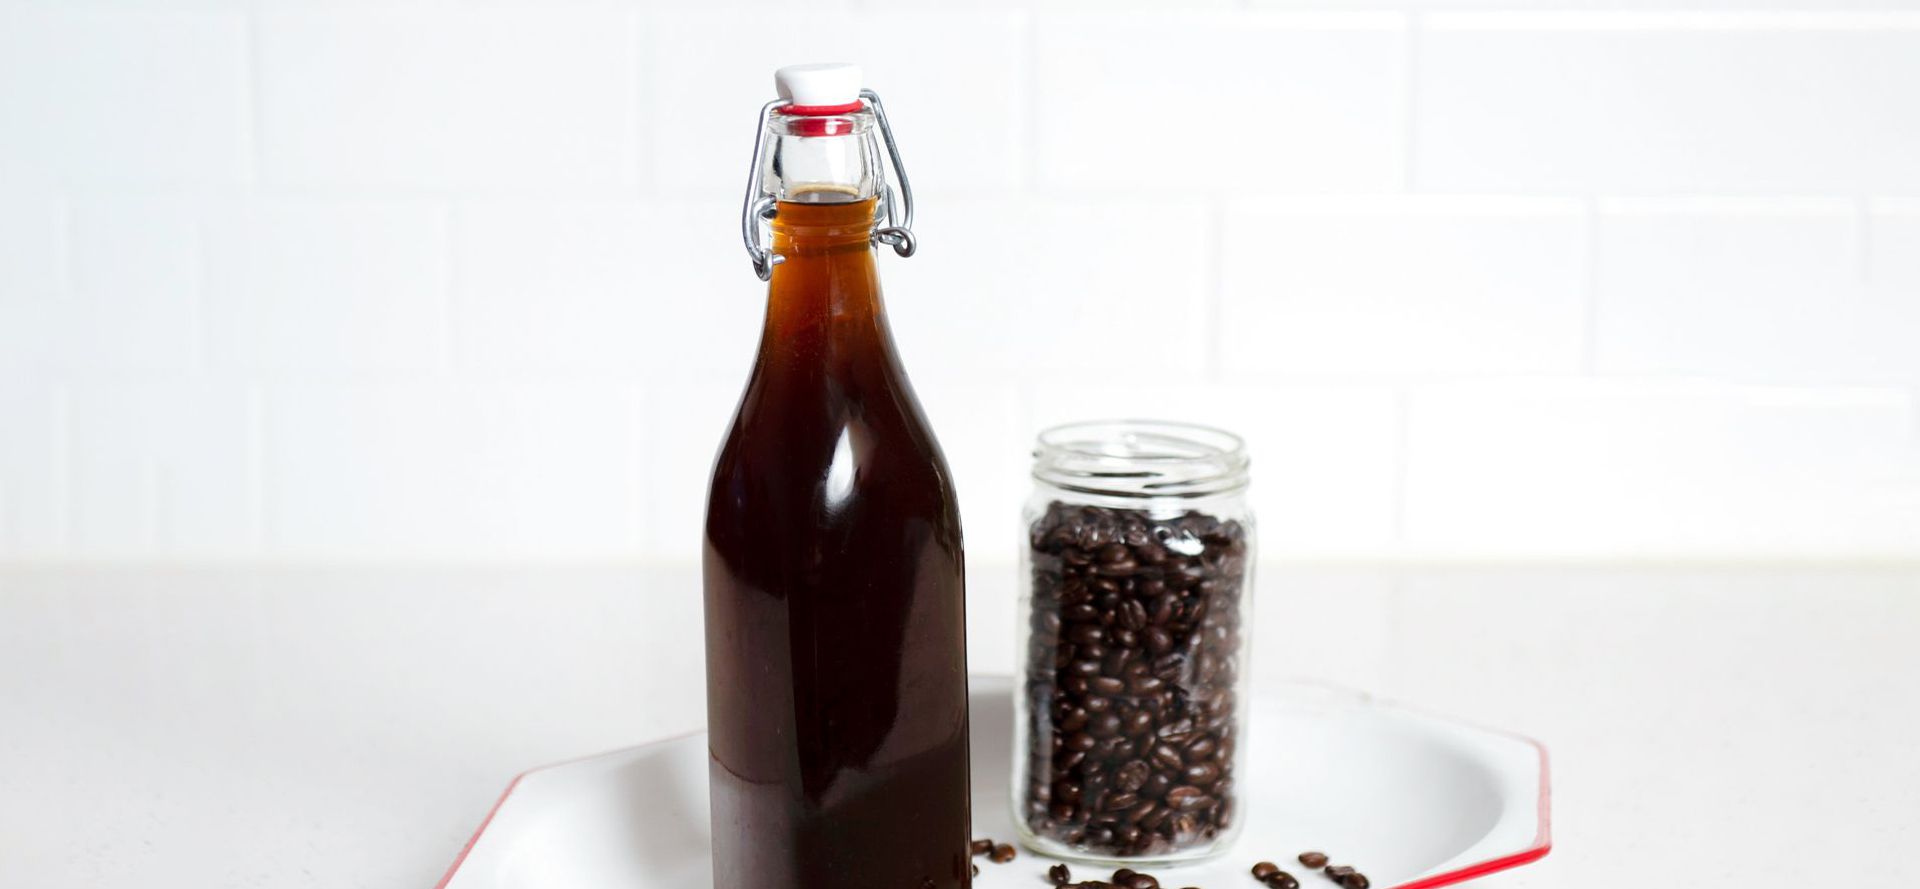 Homemade syrups for your coffee.